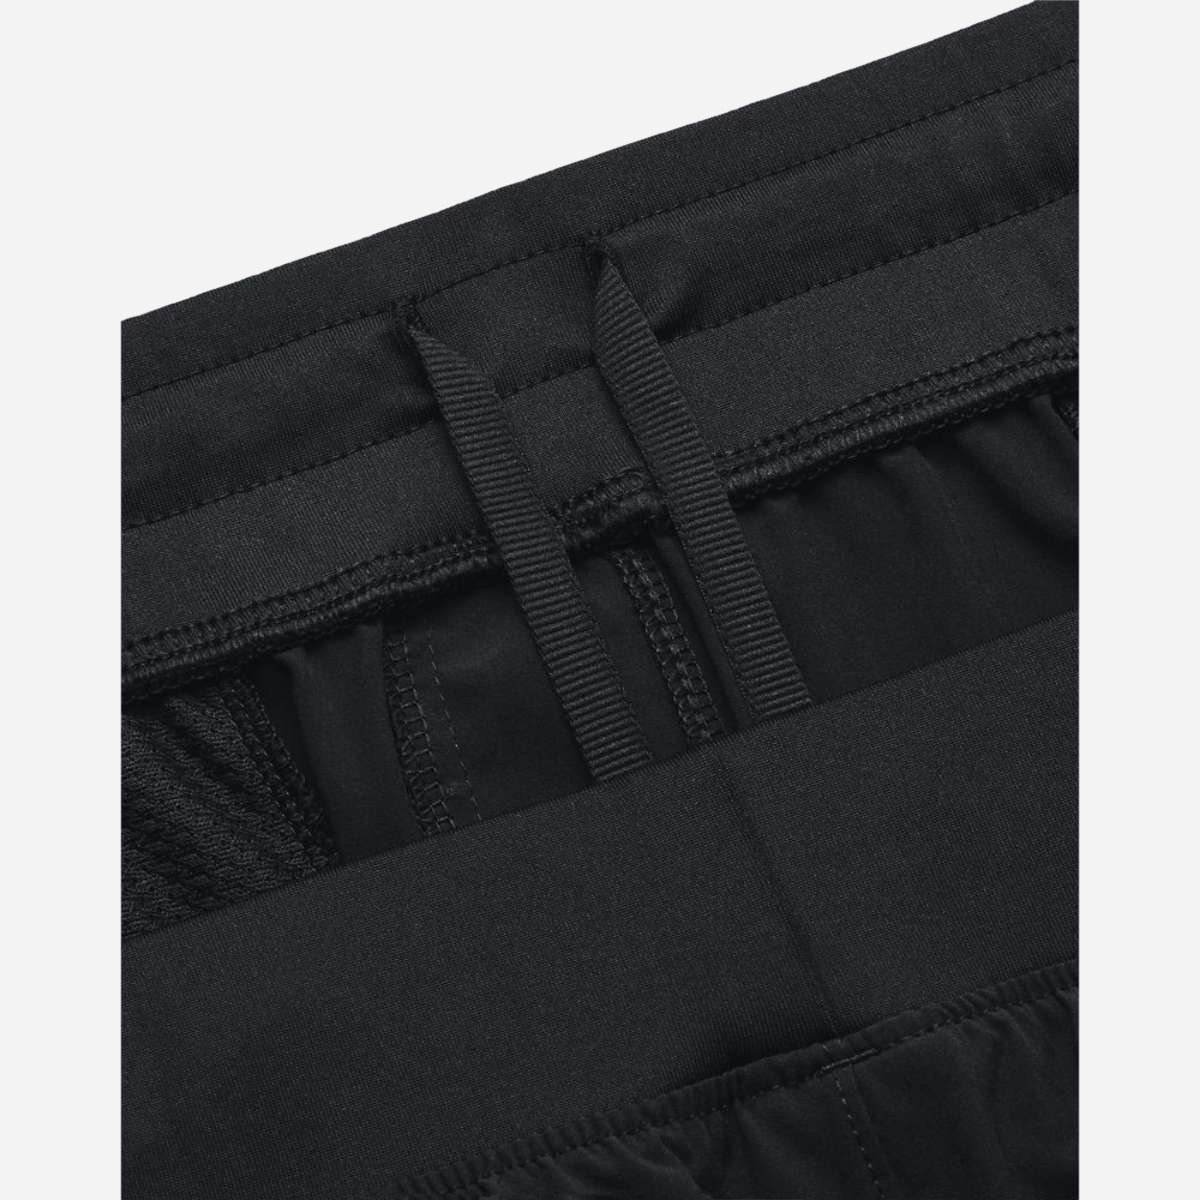 AN303029 Stretch Woven Cargo Pants